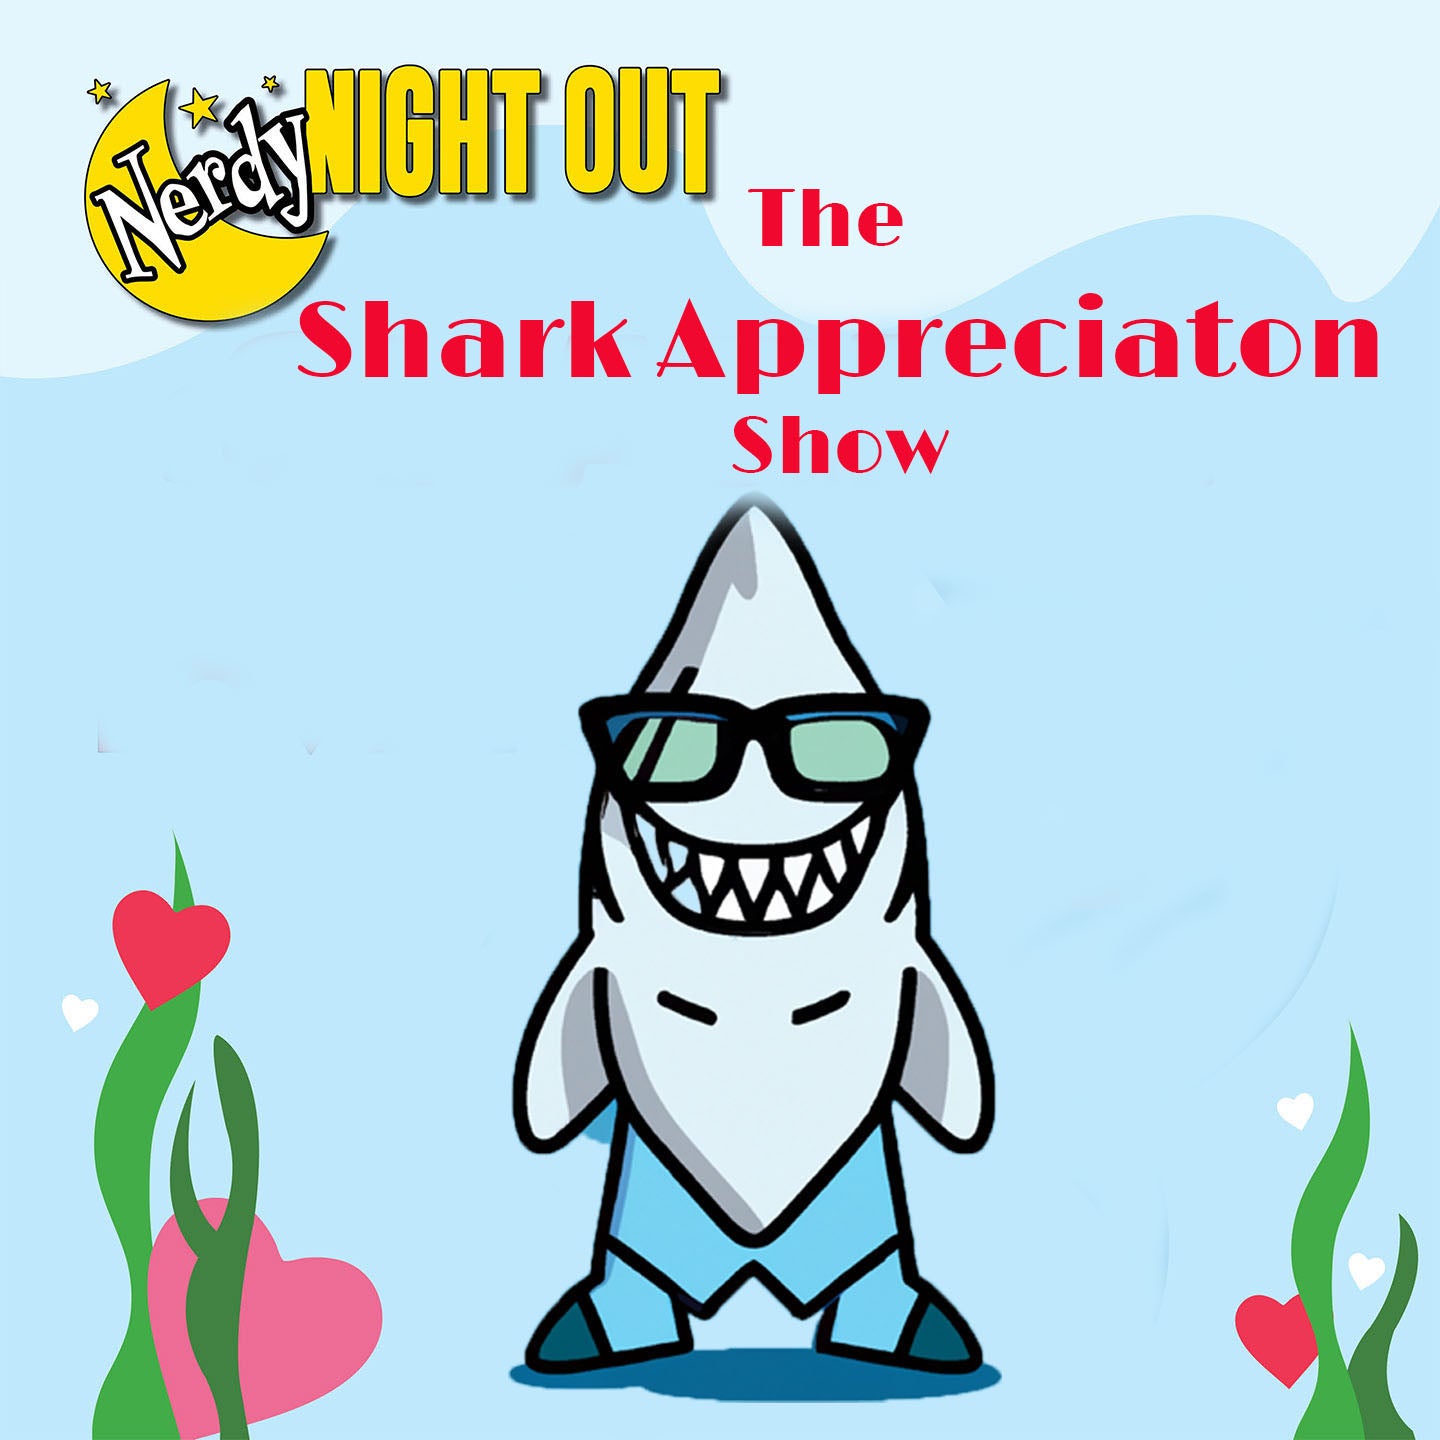 Nerdy Night Out: The Shark Appreciation Show